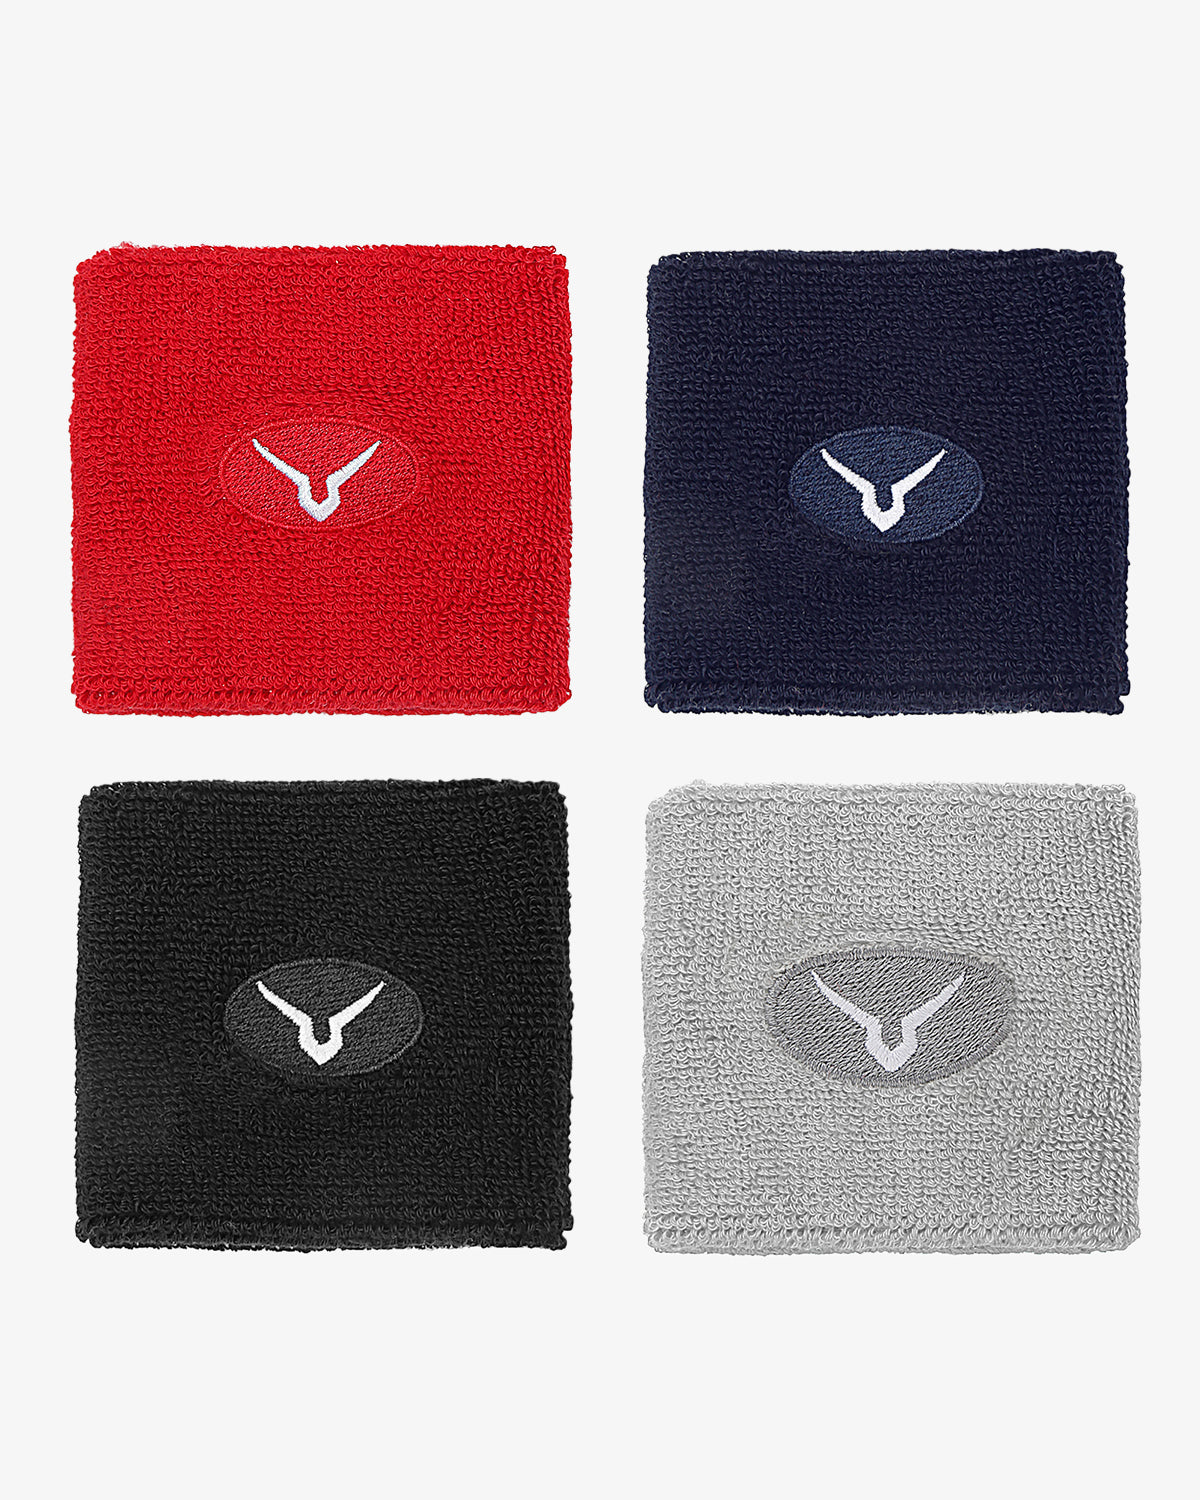 Invincible Cotton Wristband Sweatbands - 3 Inch, Pack of 4 for Active Style and Maximum Absorption